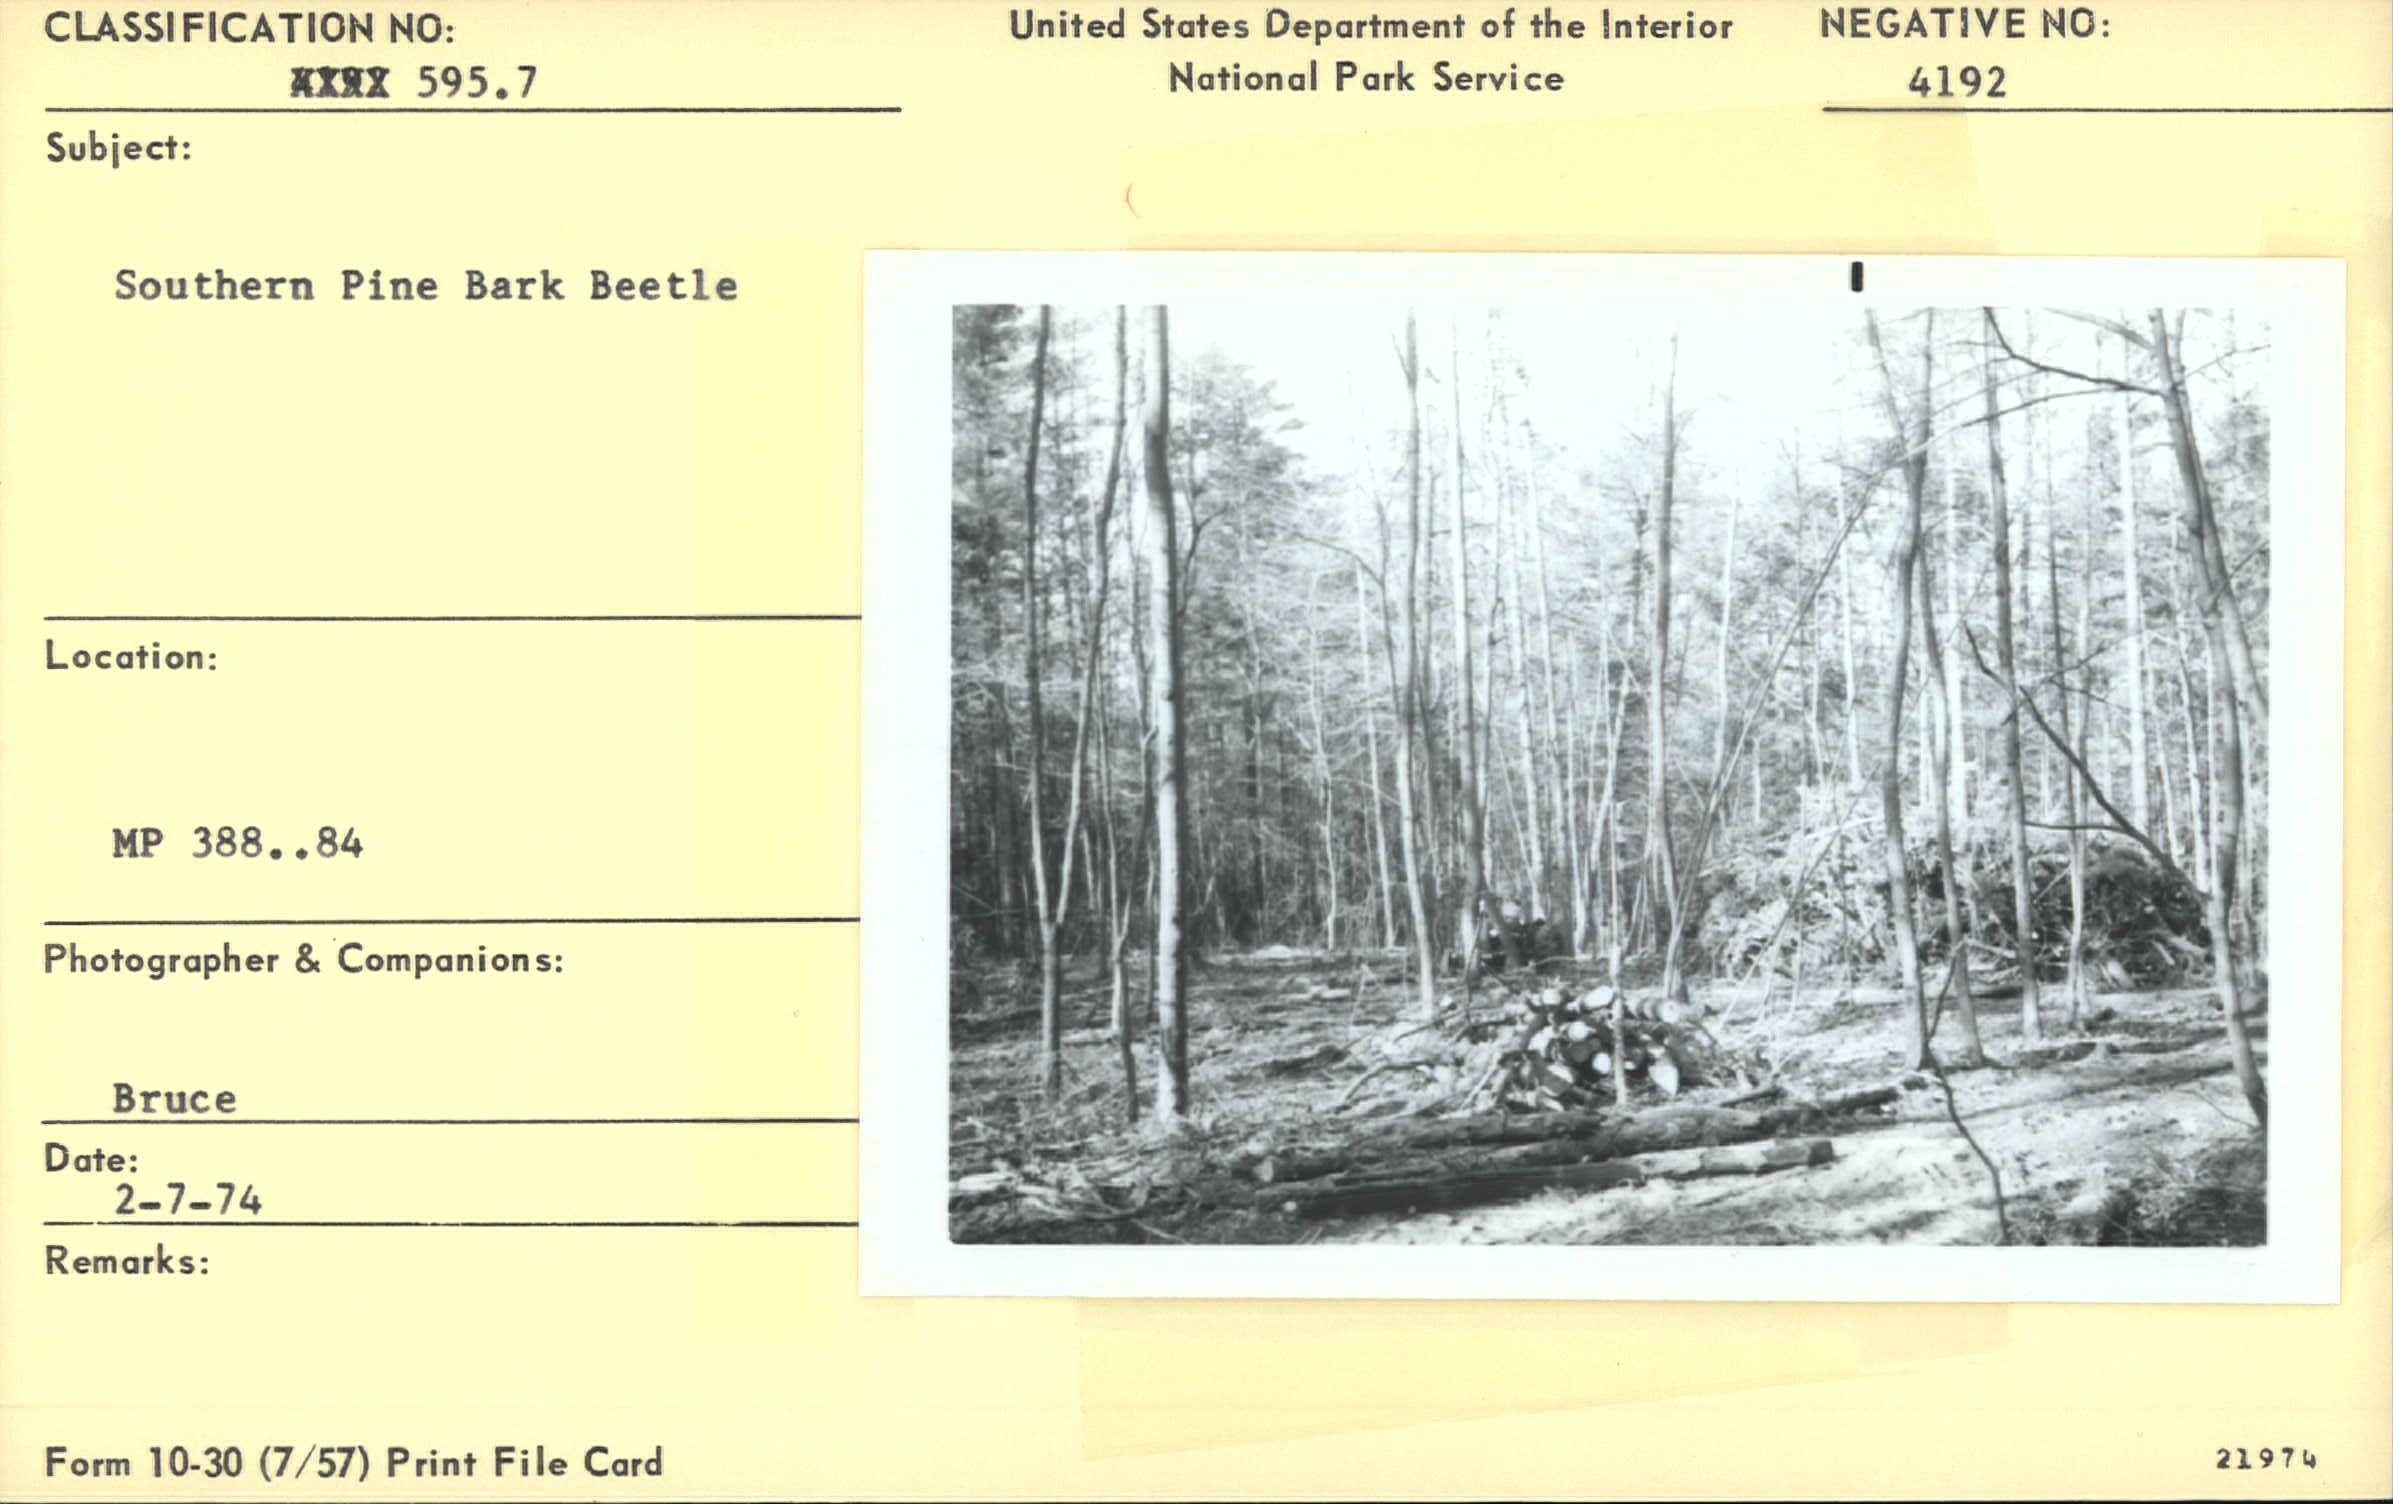 Tree damage from Southern pine beetle